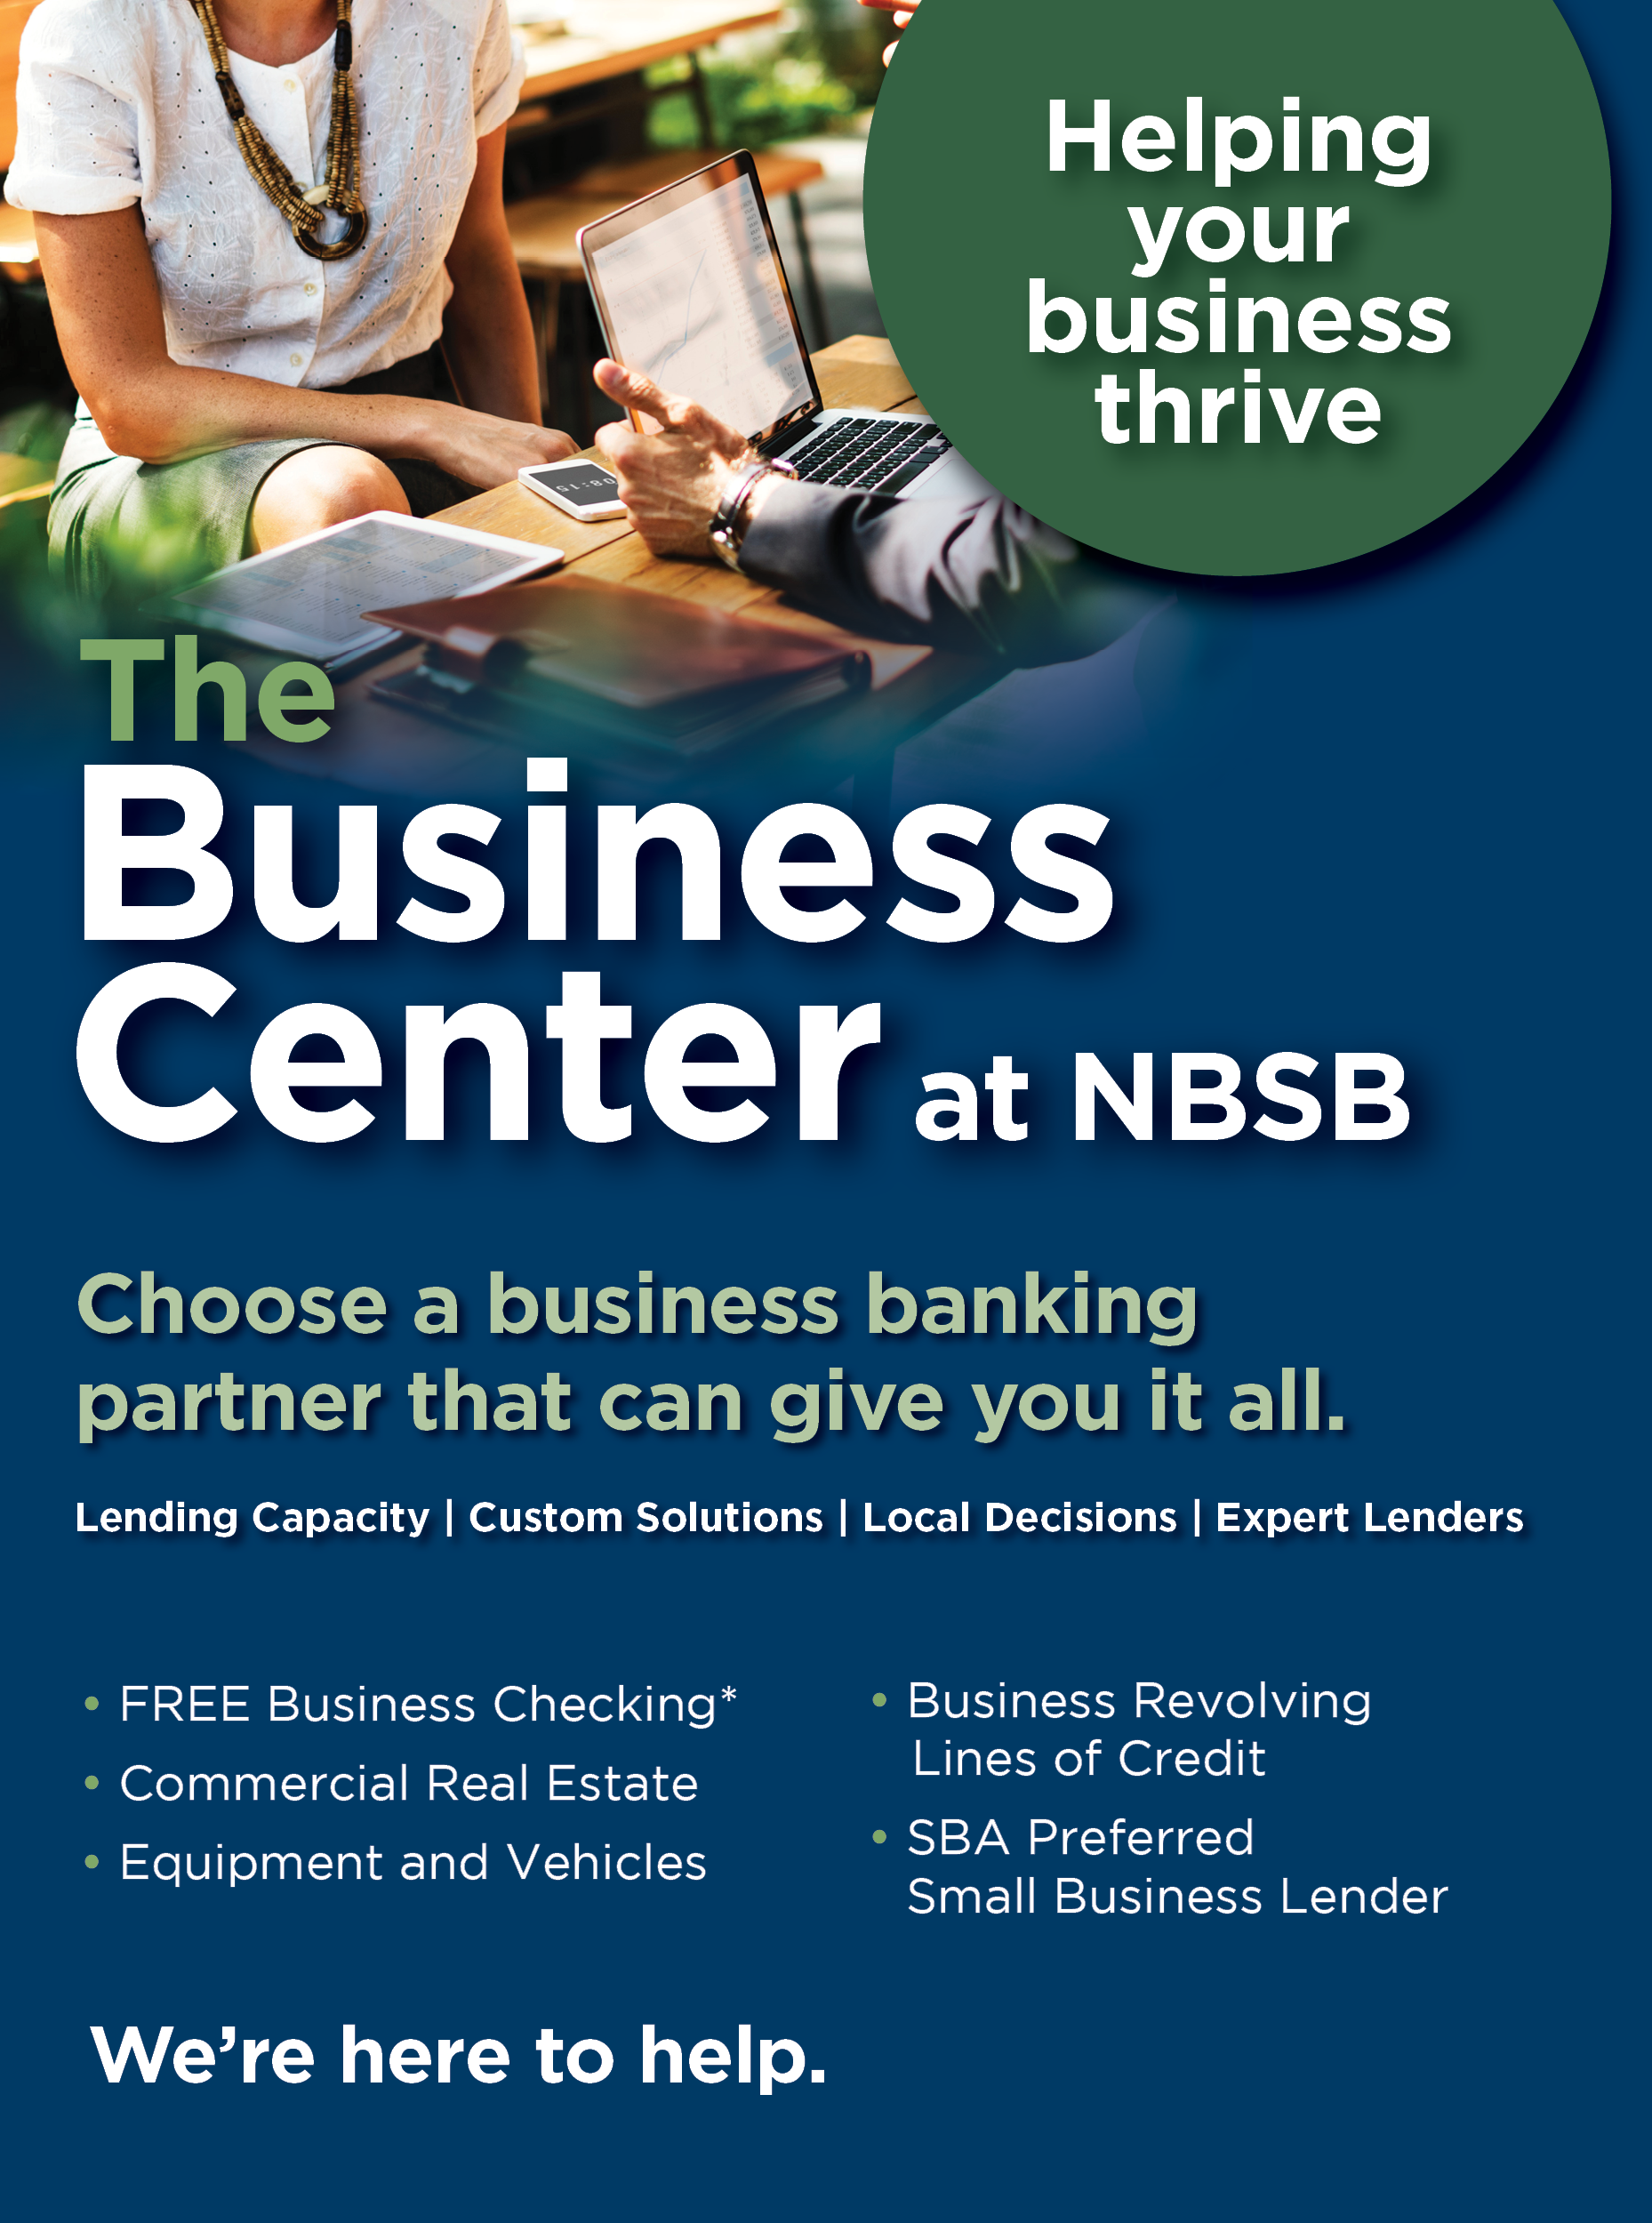 Helping your business thrive. The Business Center at NBSB. Choose a business banking partner that can give you it all. Lending capacity, custom solutions, local decisions and expert lenders. NBSB offers, free Business Checking. See disclosure. Commercial Real Estate loans, Equipment and vehicle loans, business revolving lines of credit and they are an SBA preferred business lender. We’re here to help.